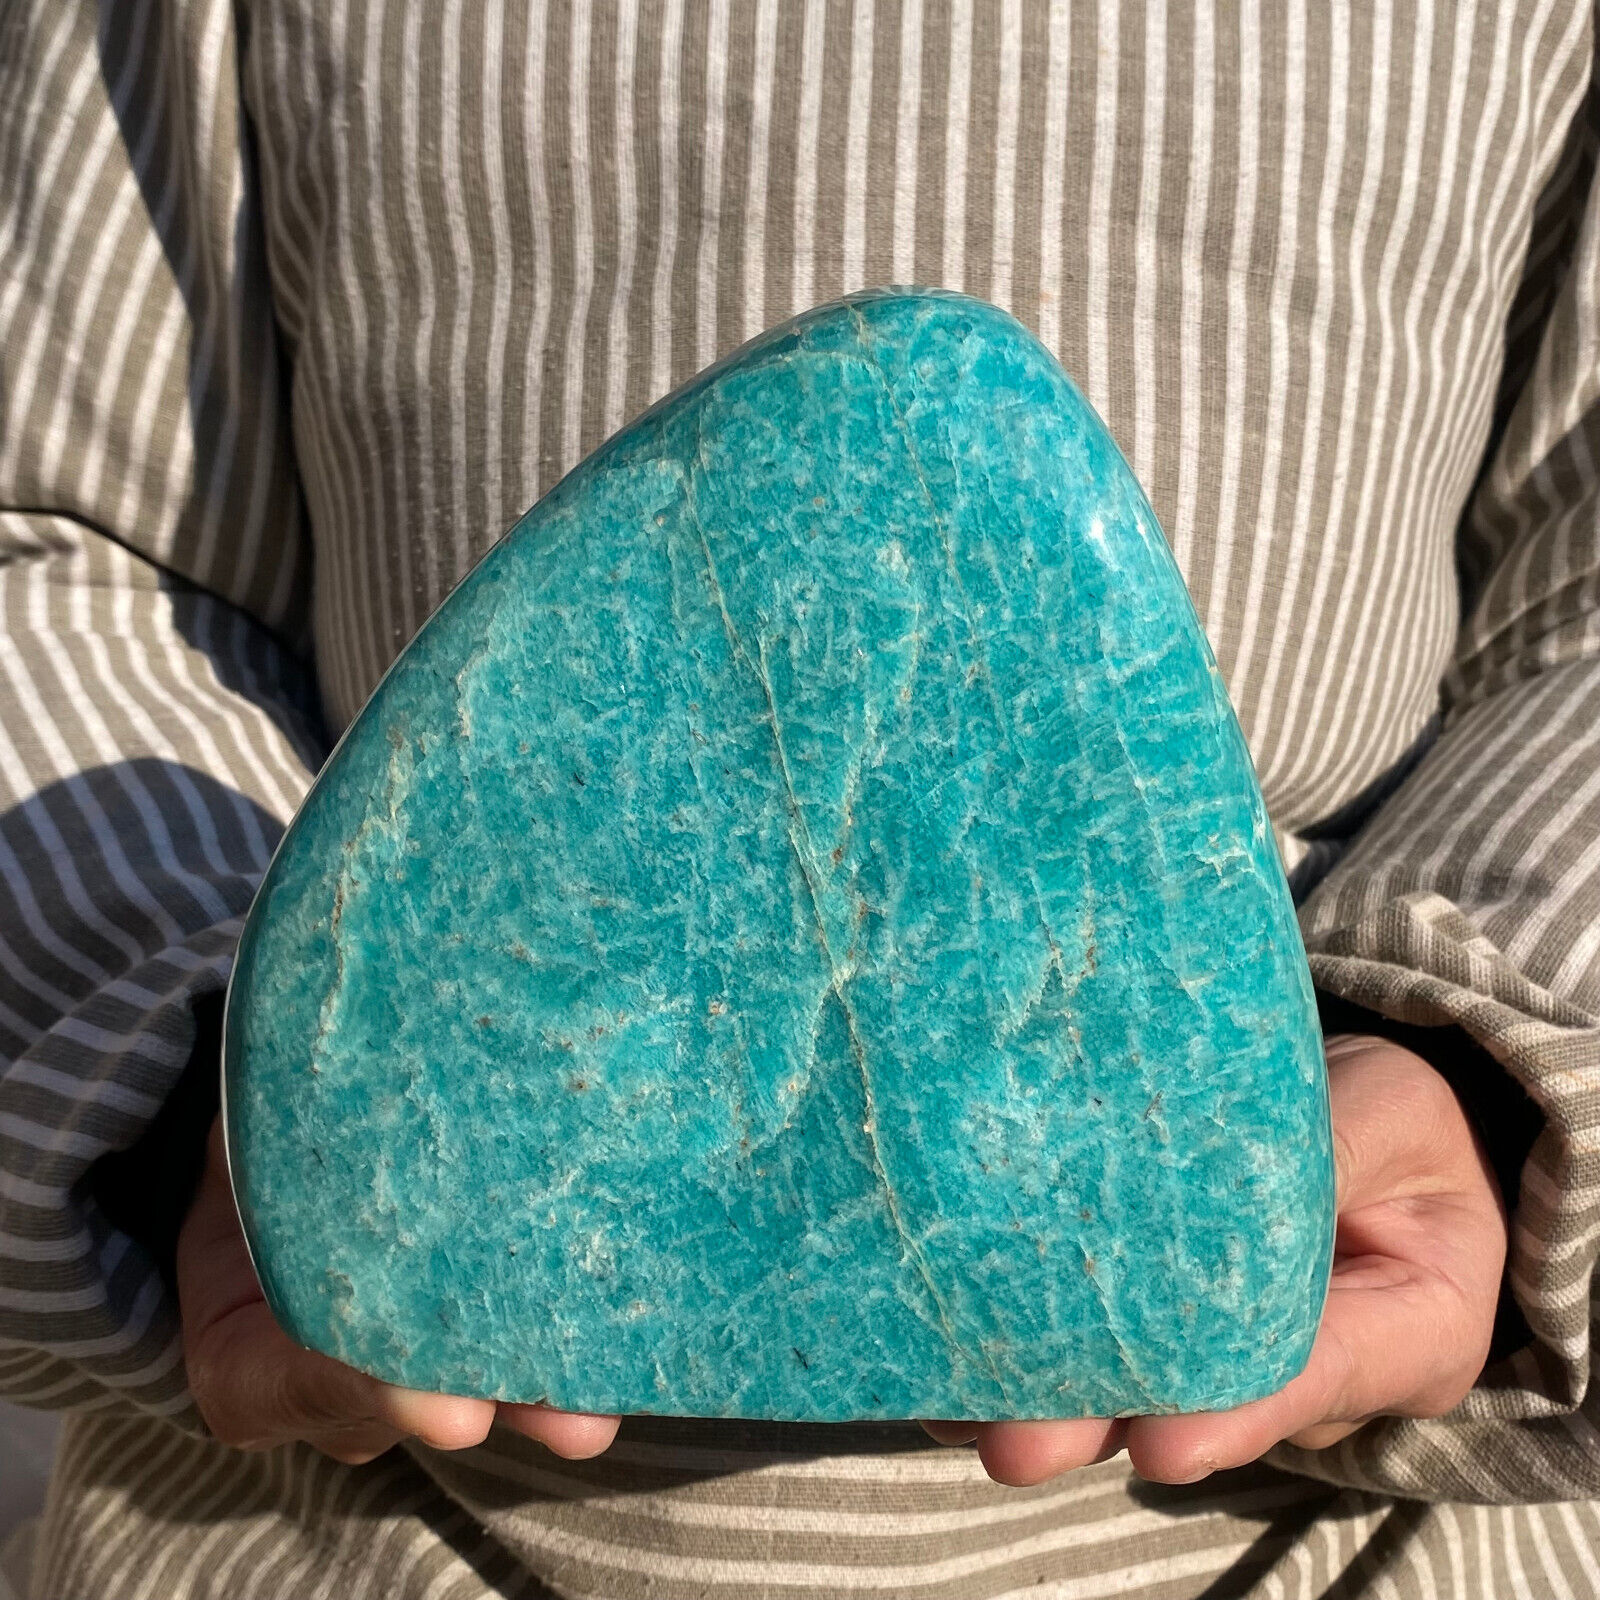 4.2lb A++Large Natural Blue Green Amazonite Crystal Healing Display Specimen